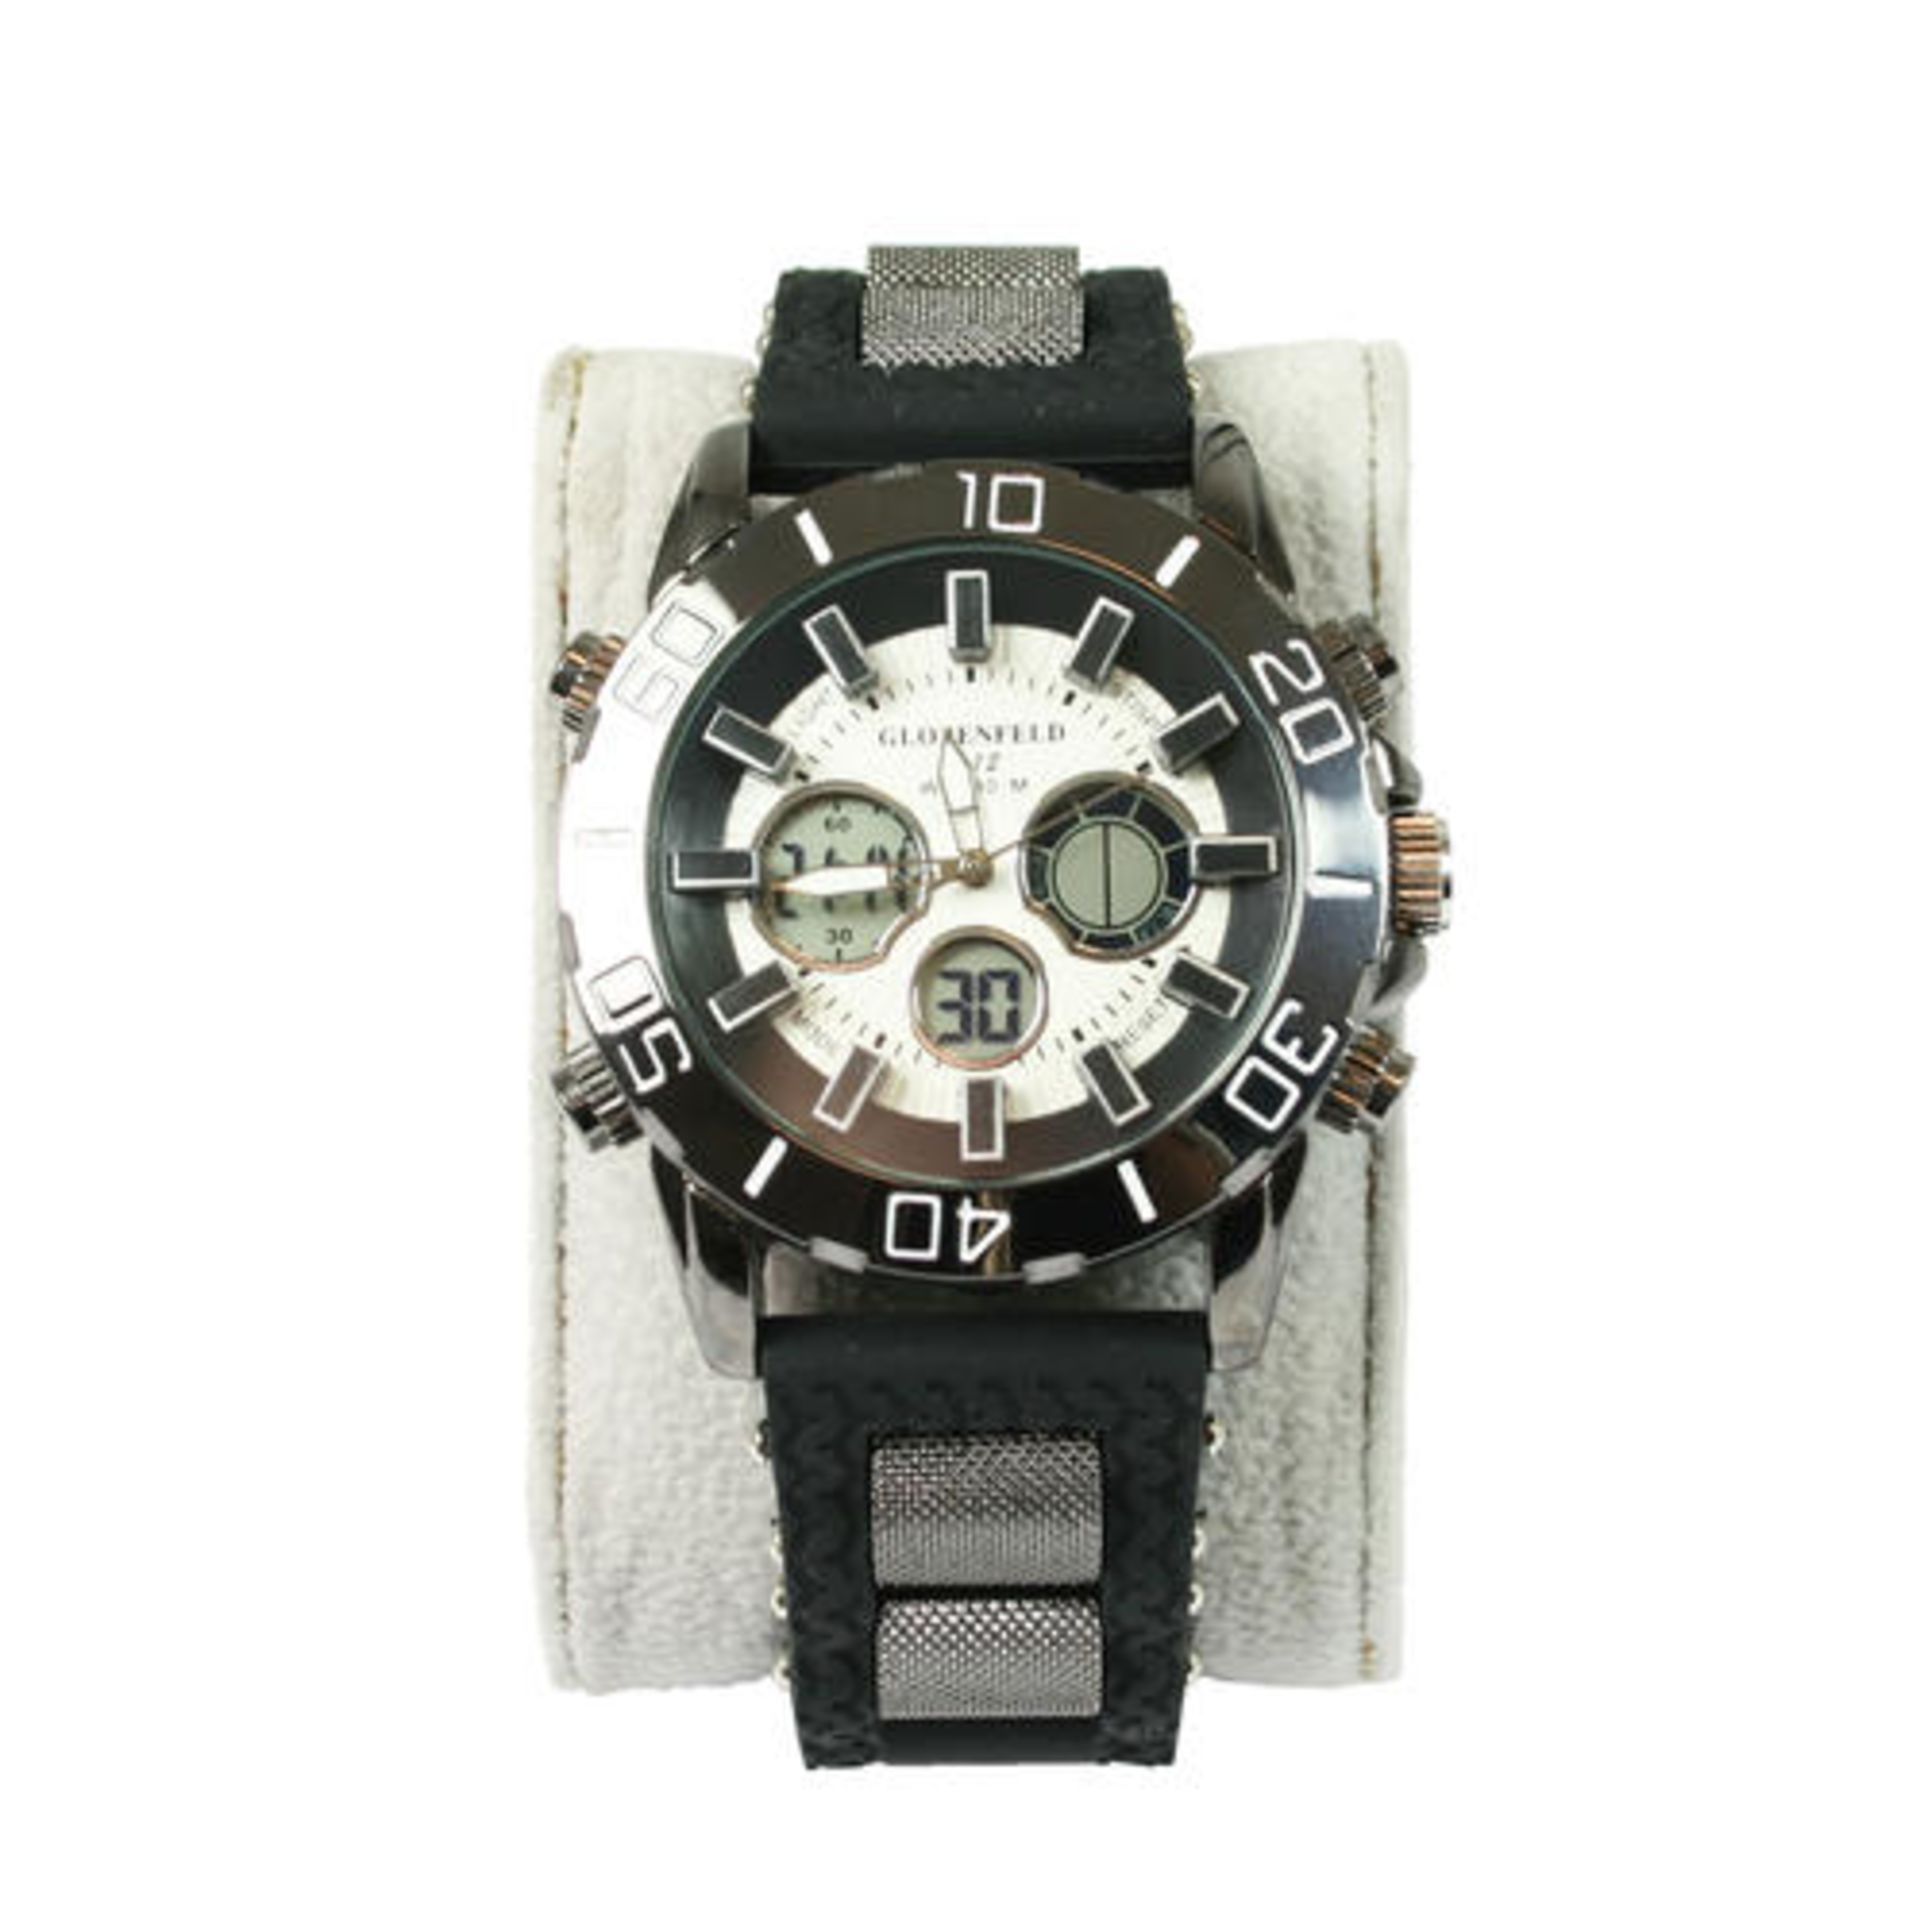 V Brand New Gents Globenfeld V.12 Limited Edition Watch SRP Up to £425 With Box - Warranty -